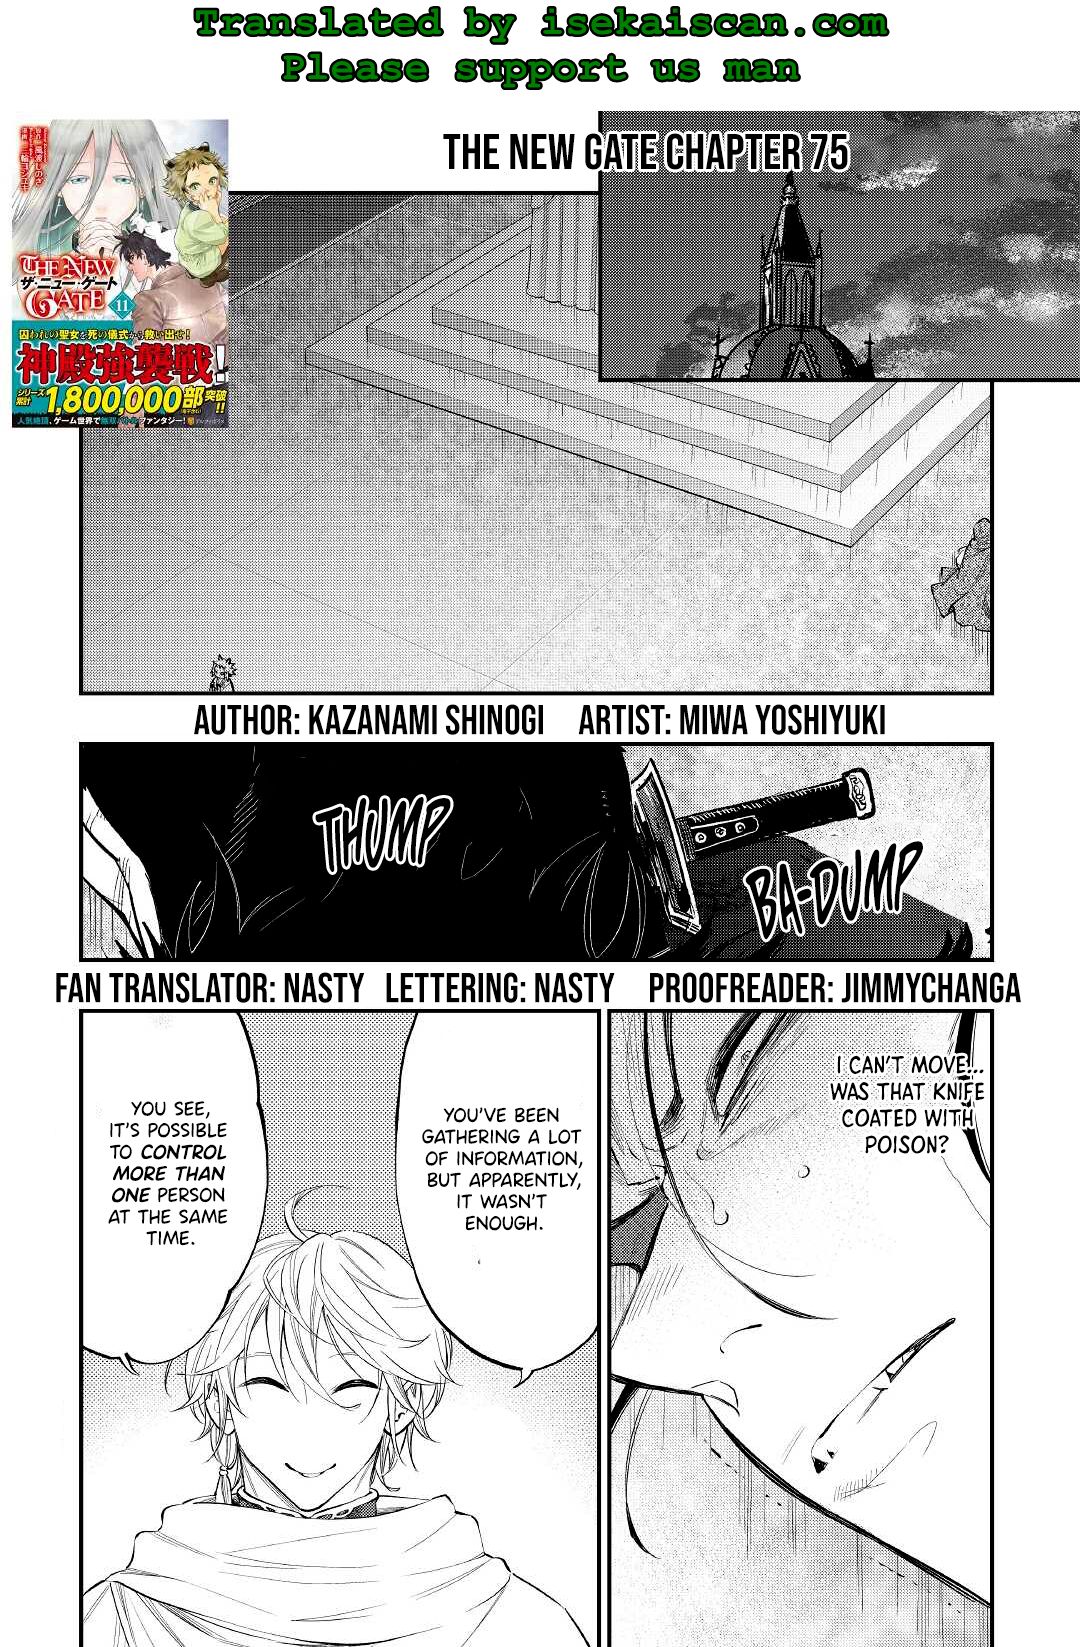 The New Gate Chapter 75 #2